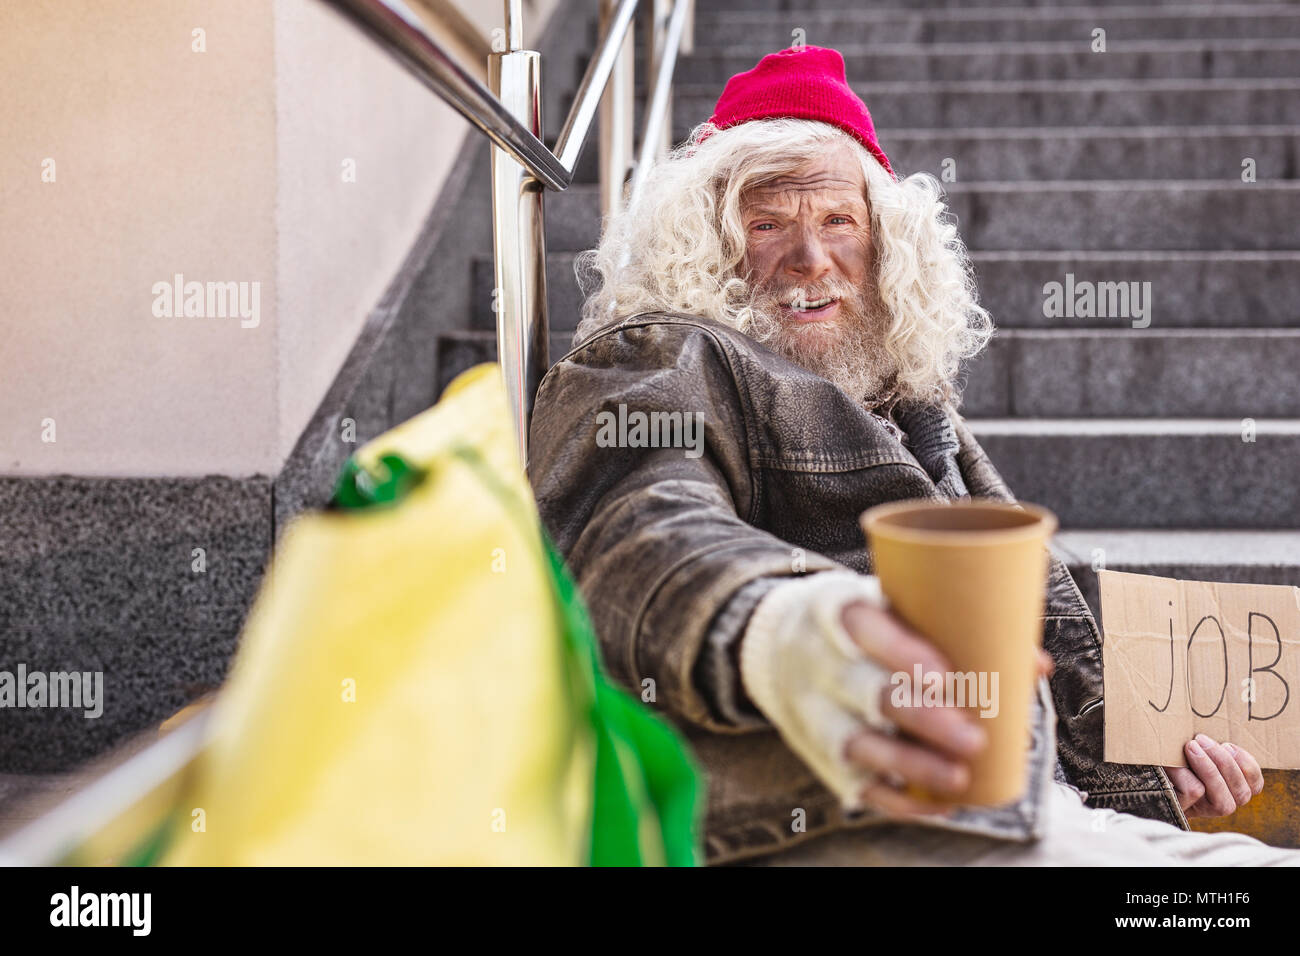 Aged bearded man being homeless Stock Photo